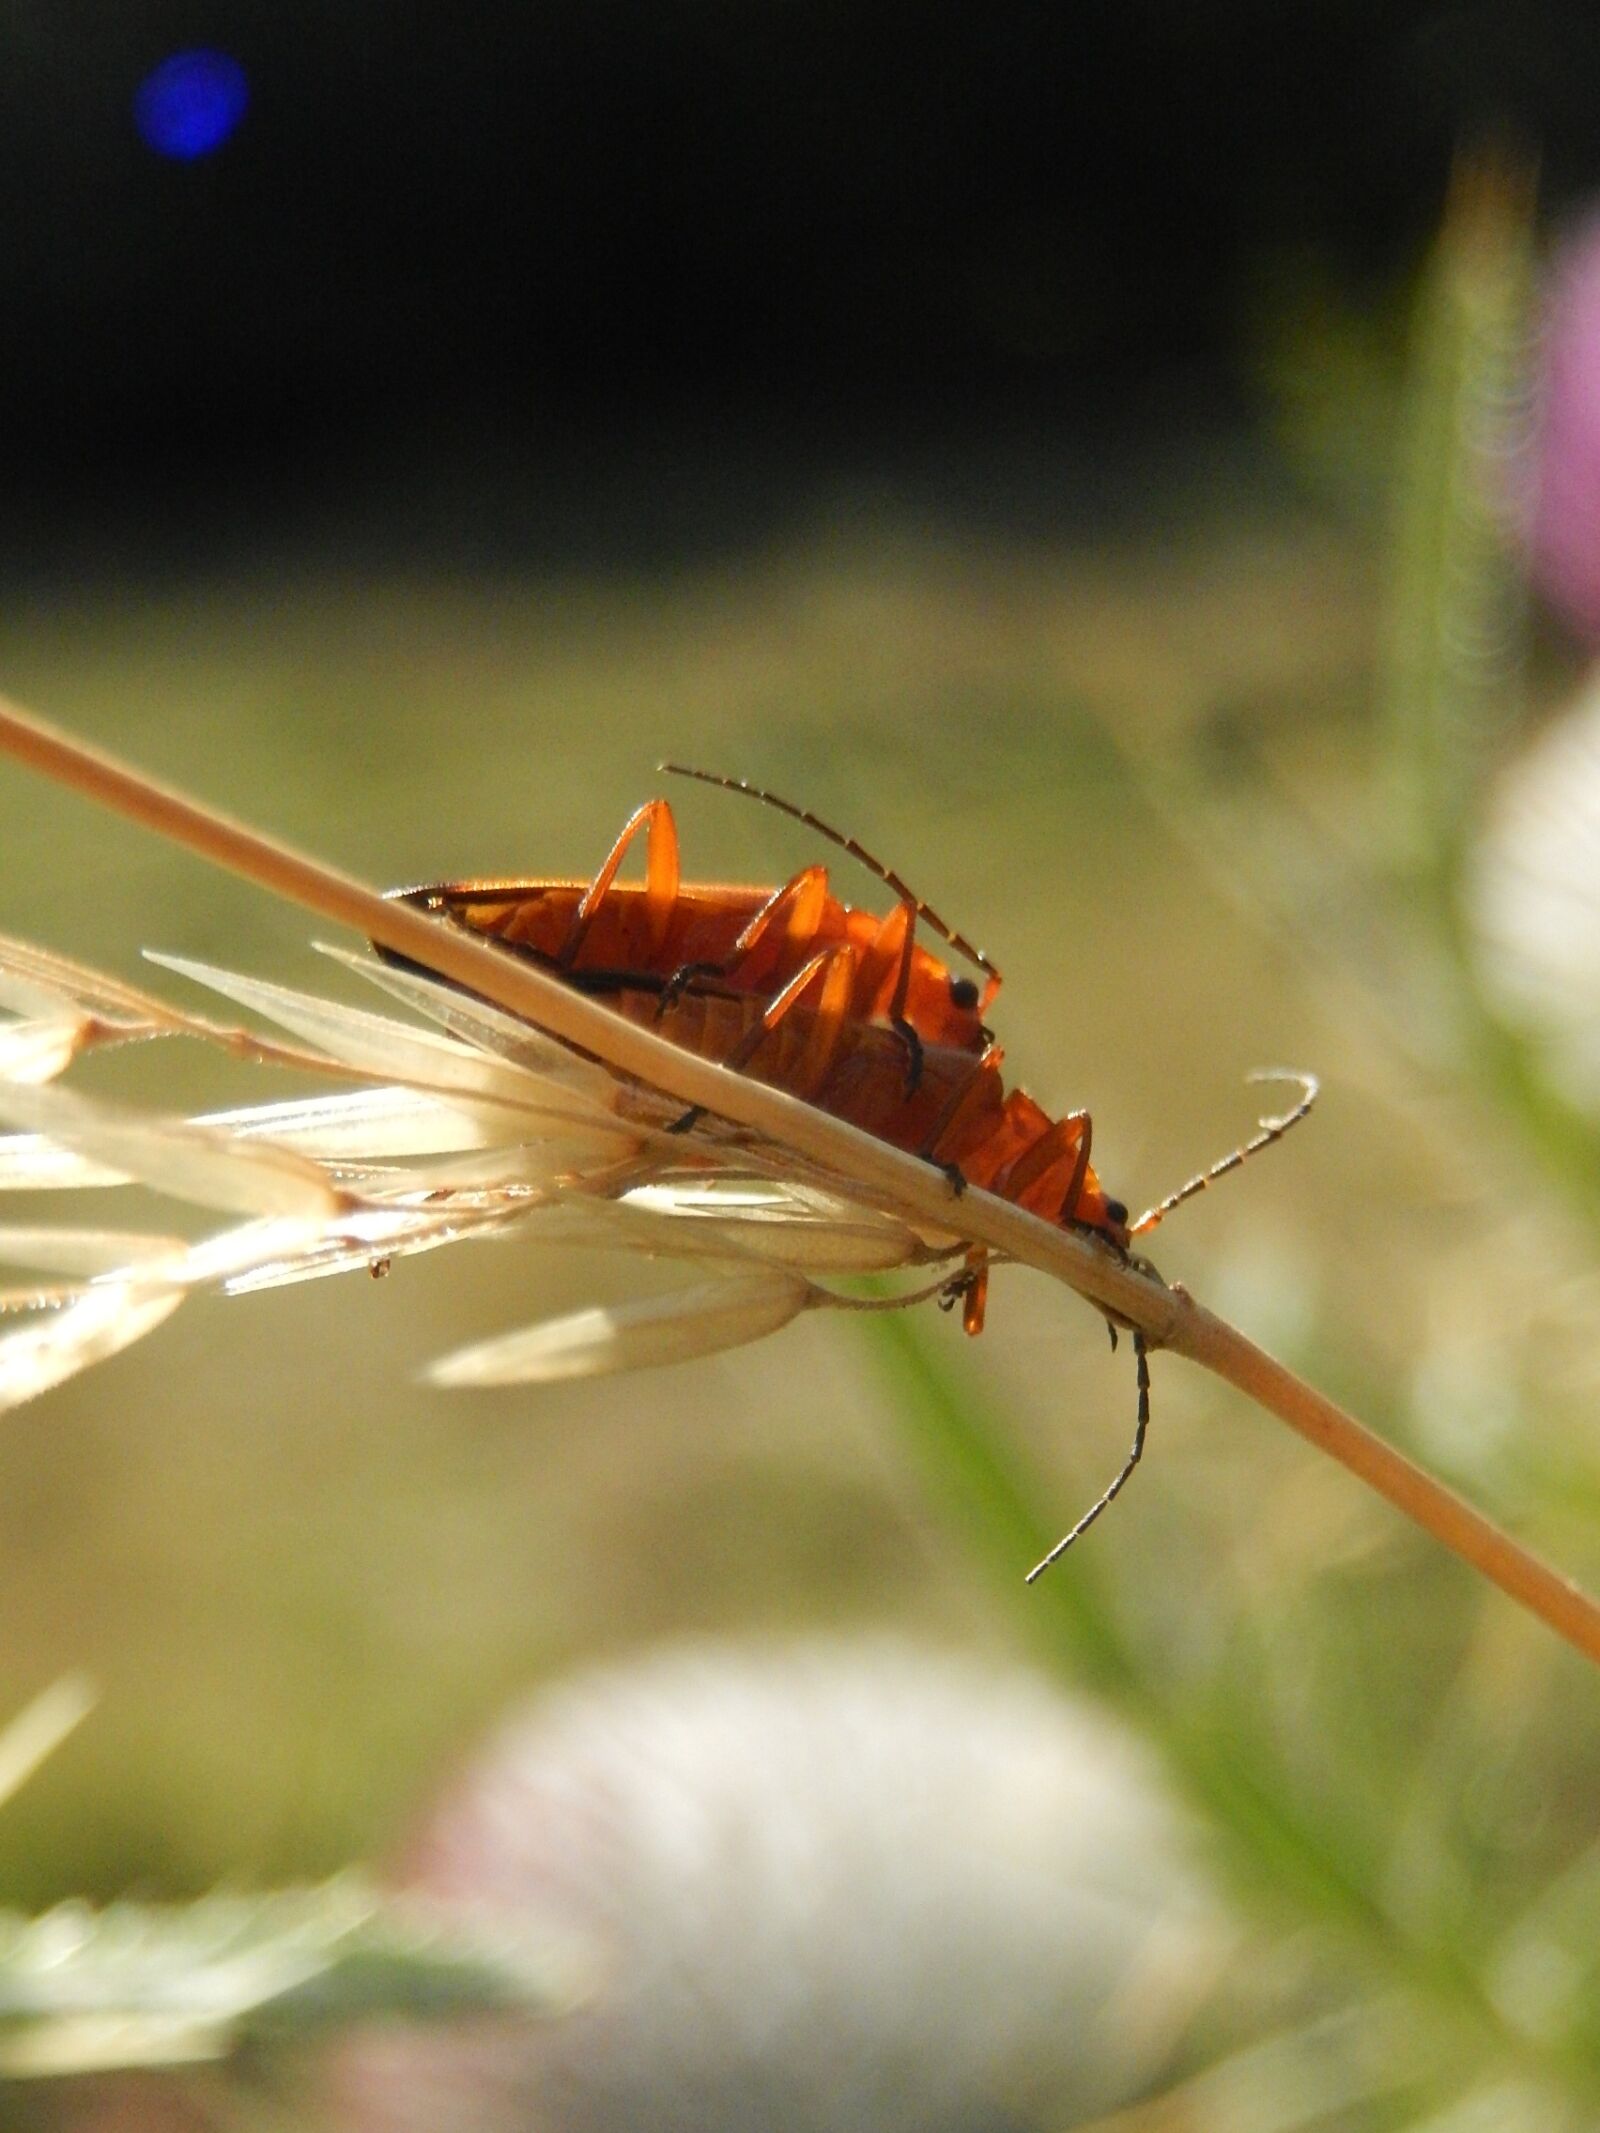 Nikon Coolpix S9500 sample photo. Insects, field, nature photography